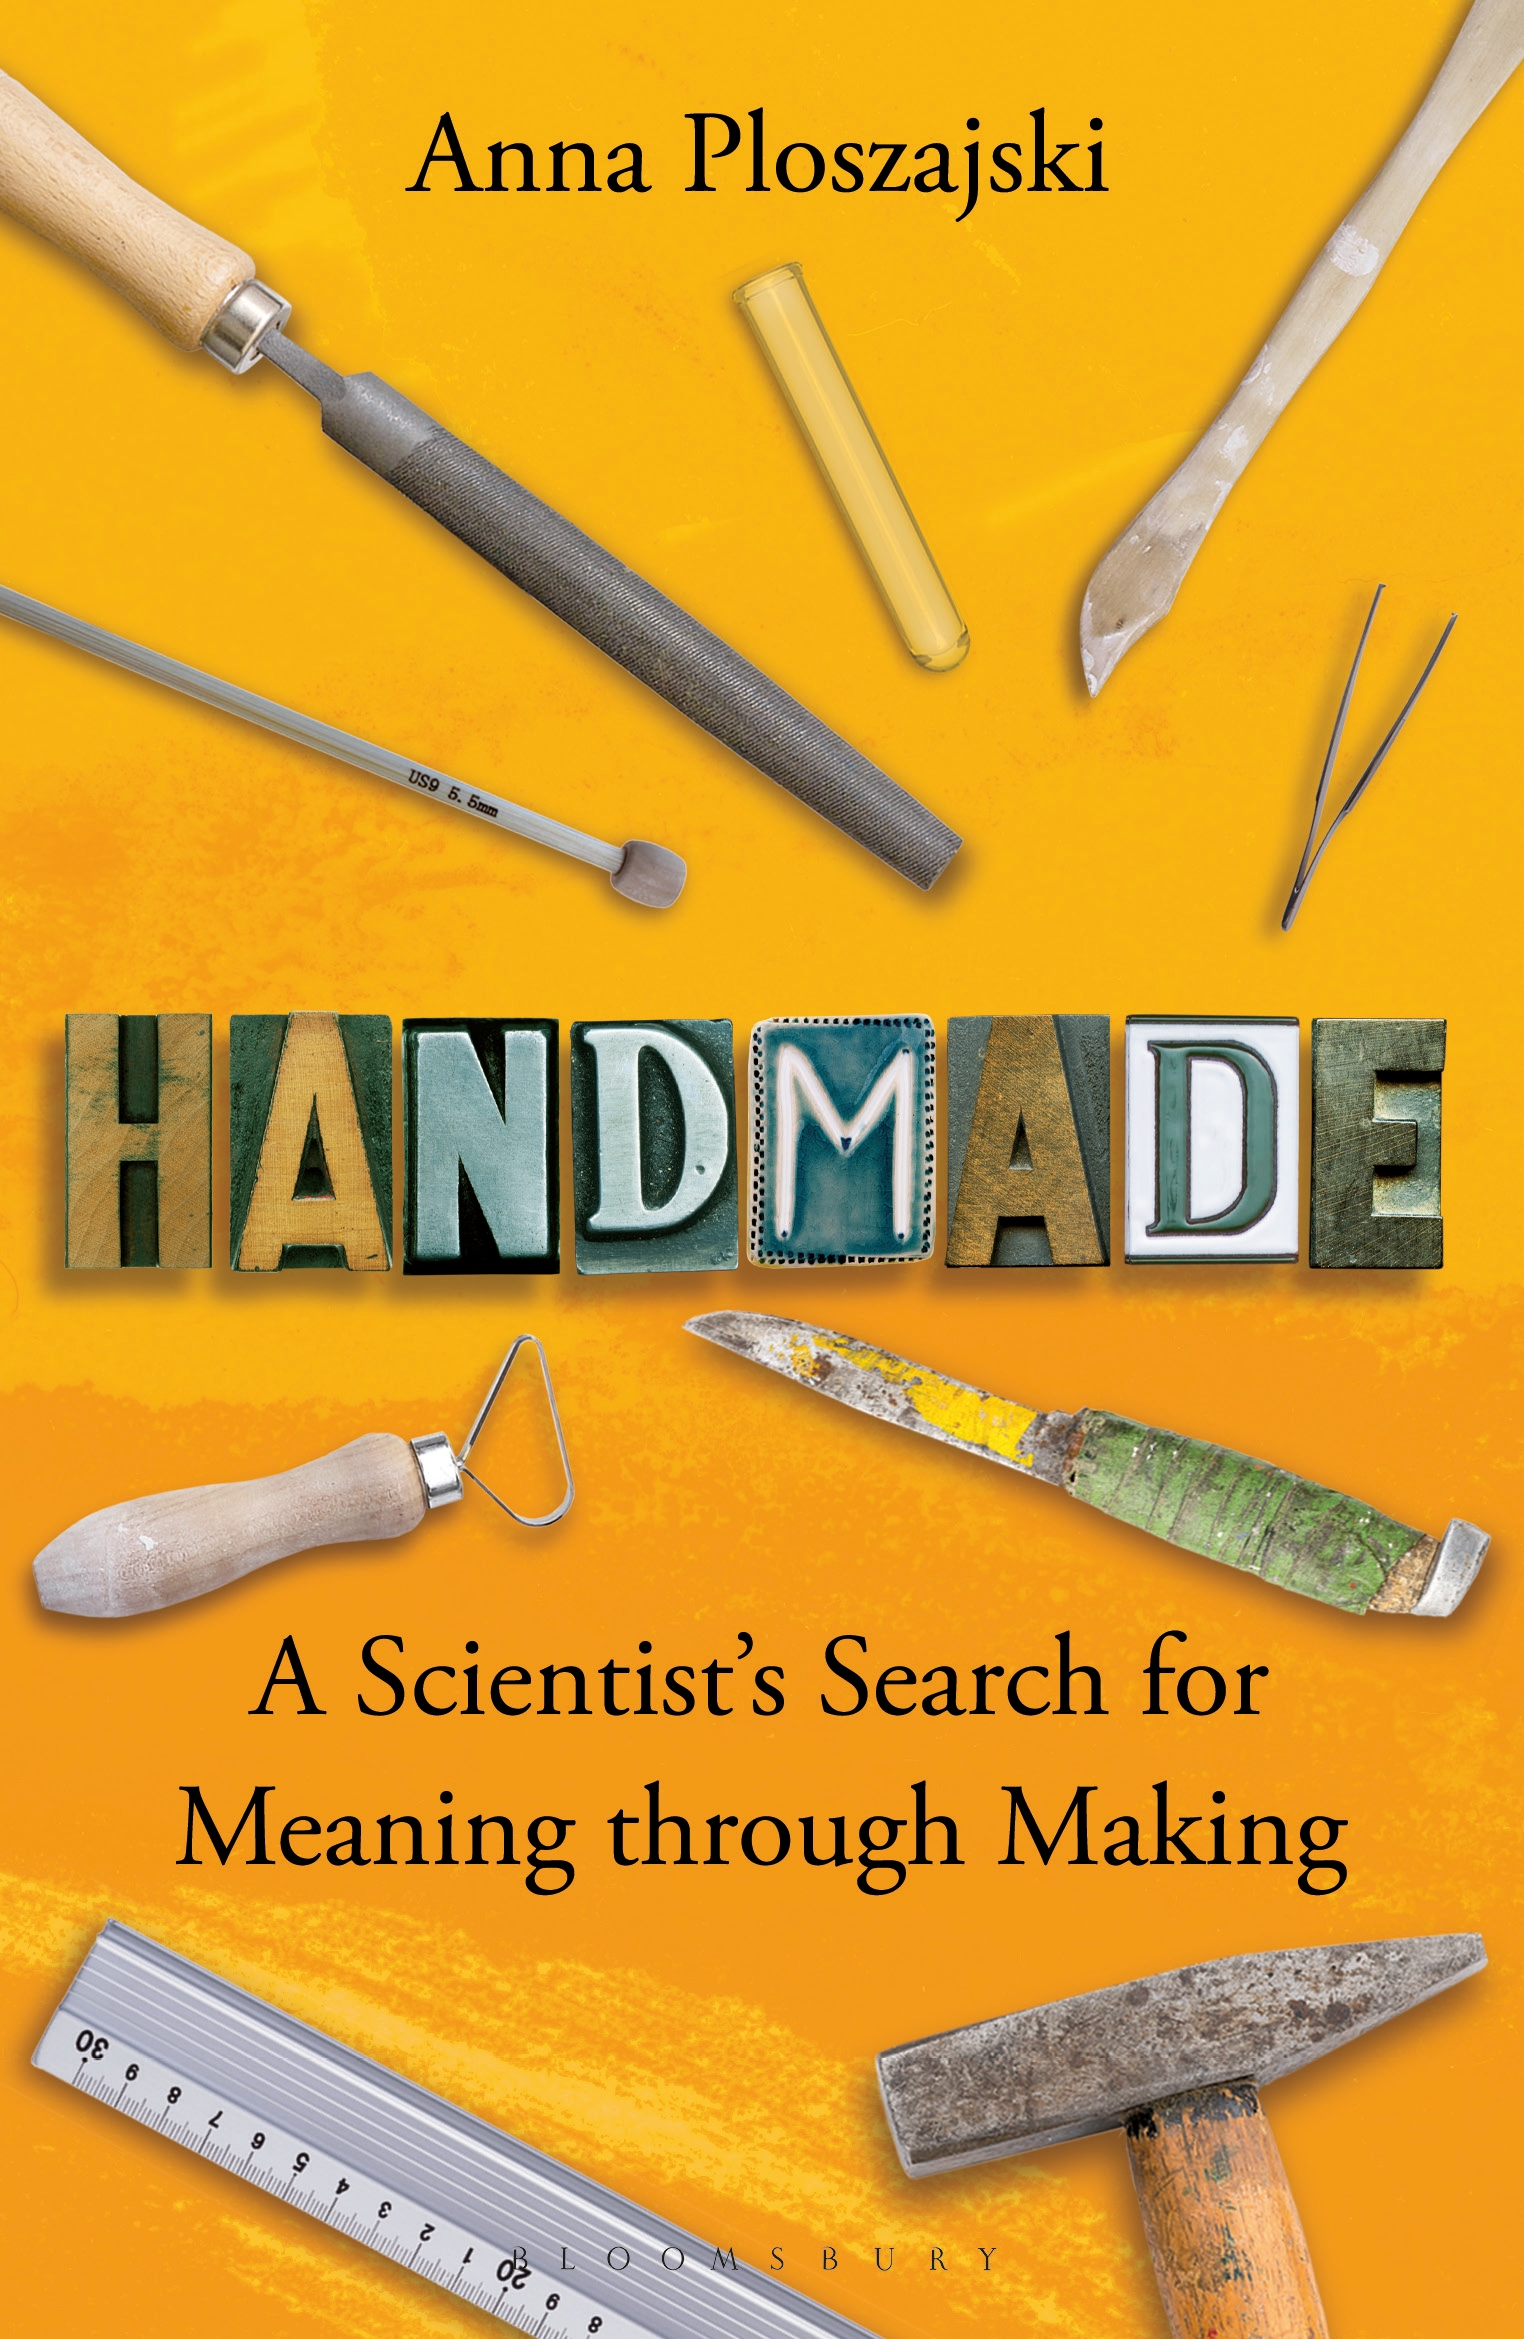 the cover of handmade a scientist's search for meaning through making.